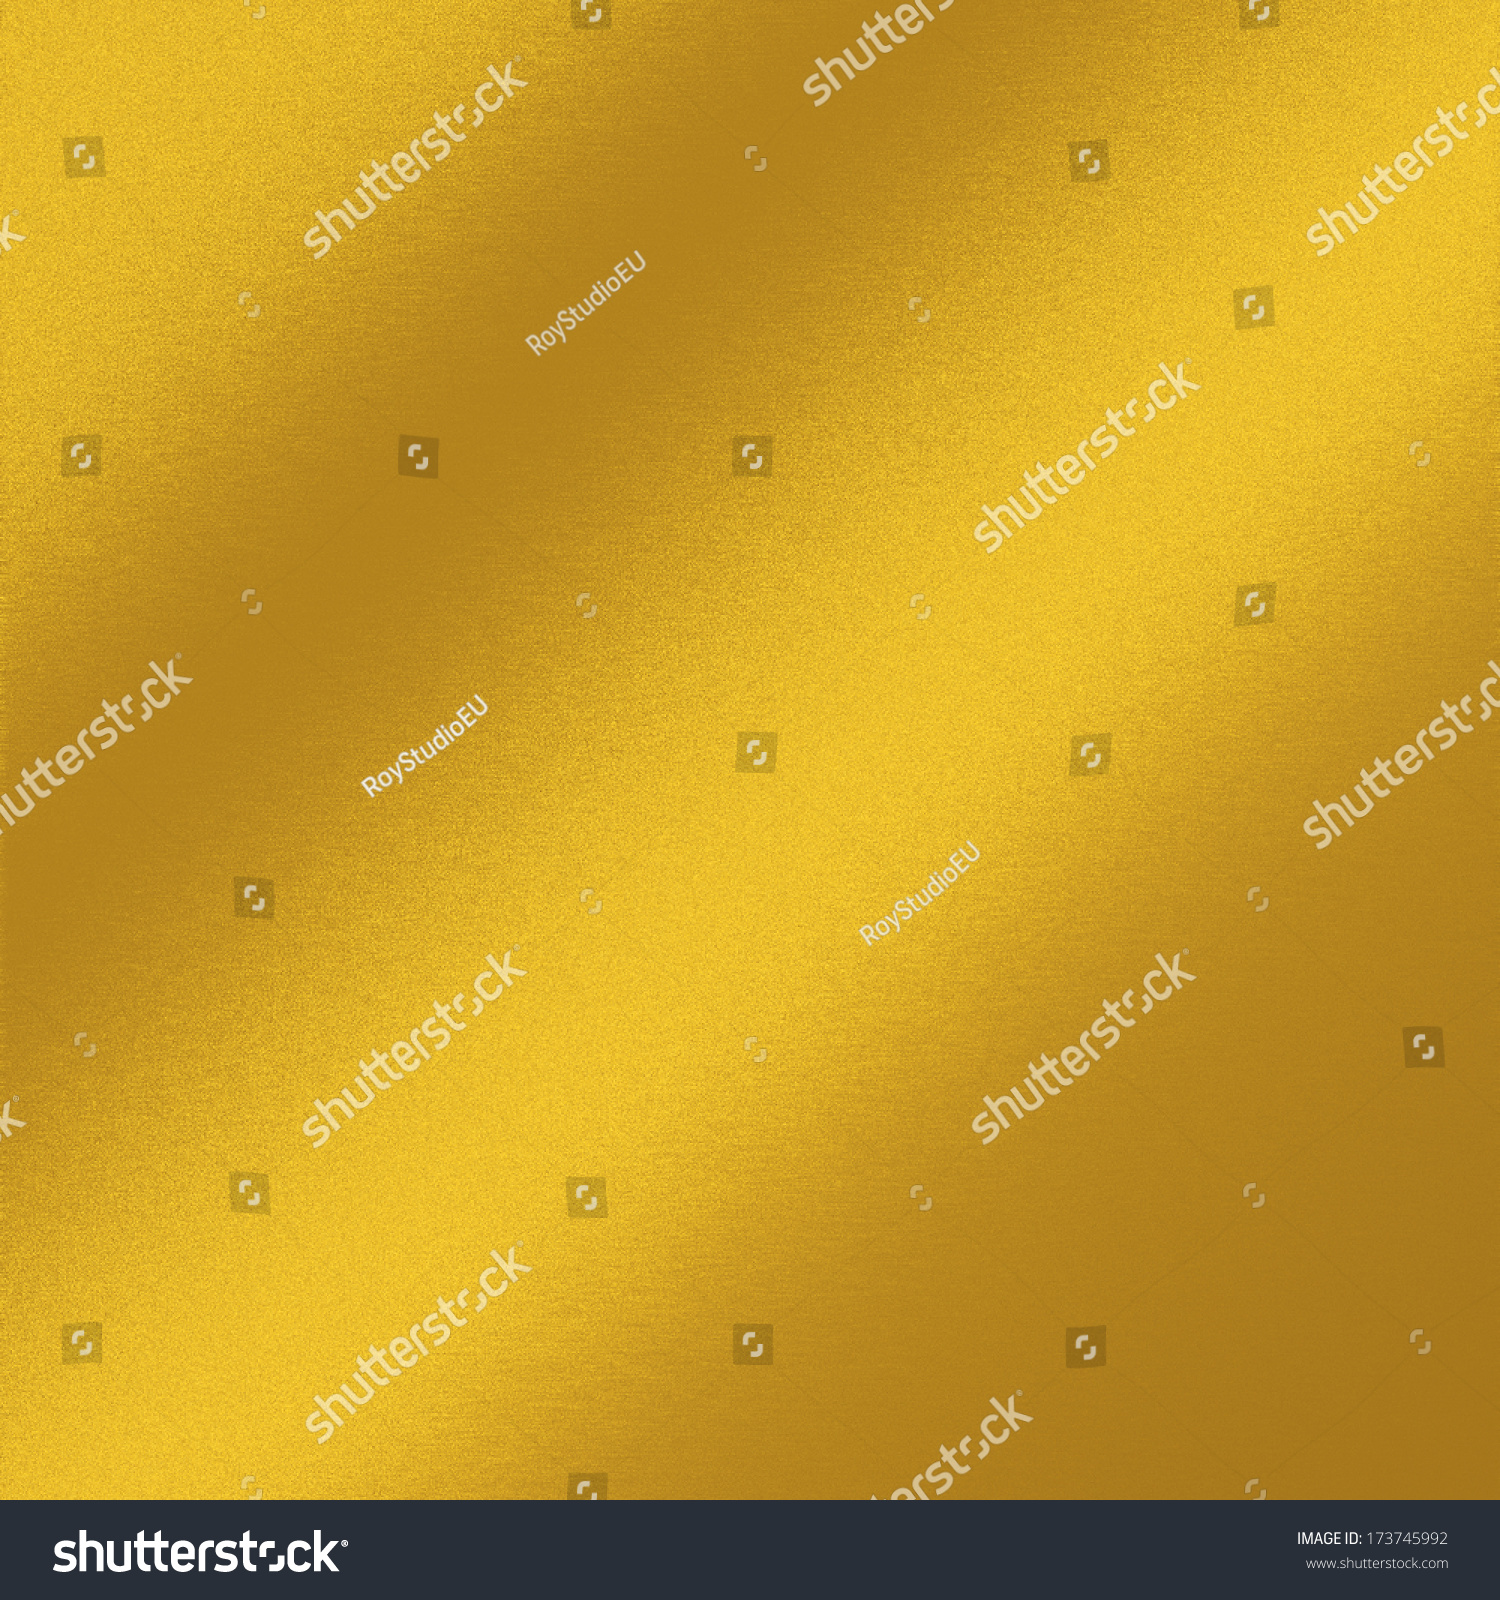 gold metal texture abstract background decorative greeting card design template #173745992